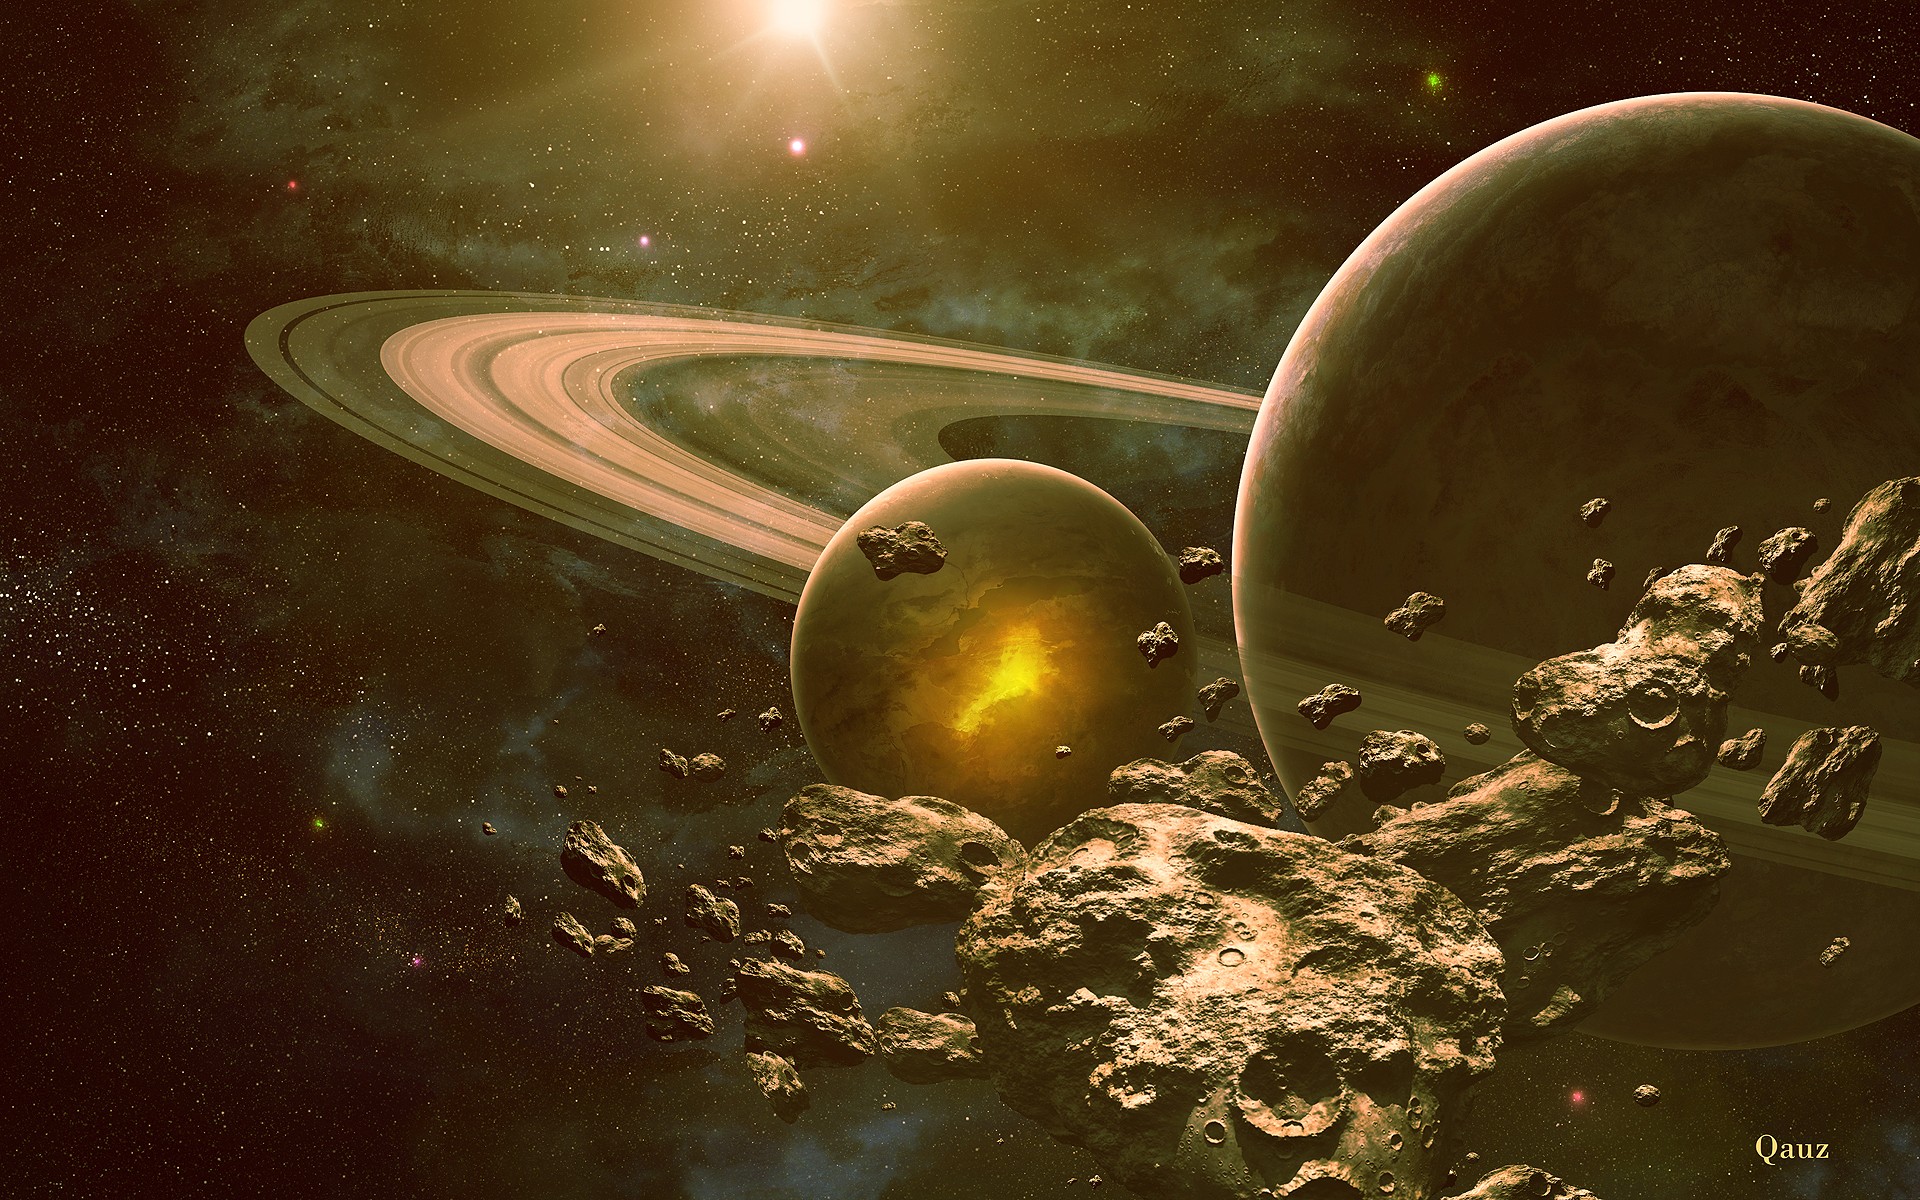 outer, Space, Planets, Rings, Digital, Art, Science, Fiction, Asteroids, Qauz Wallpaper